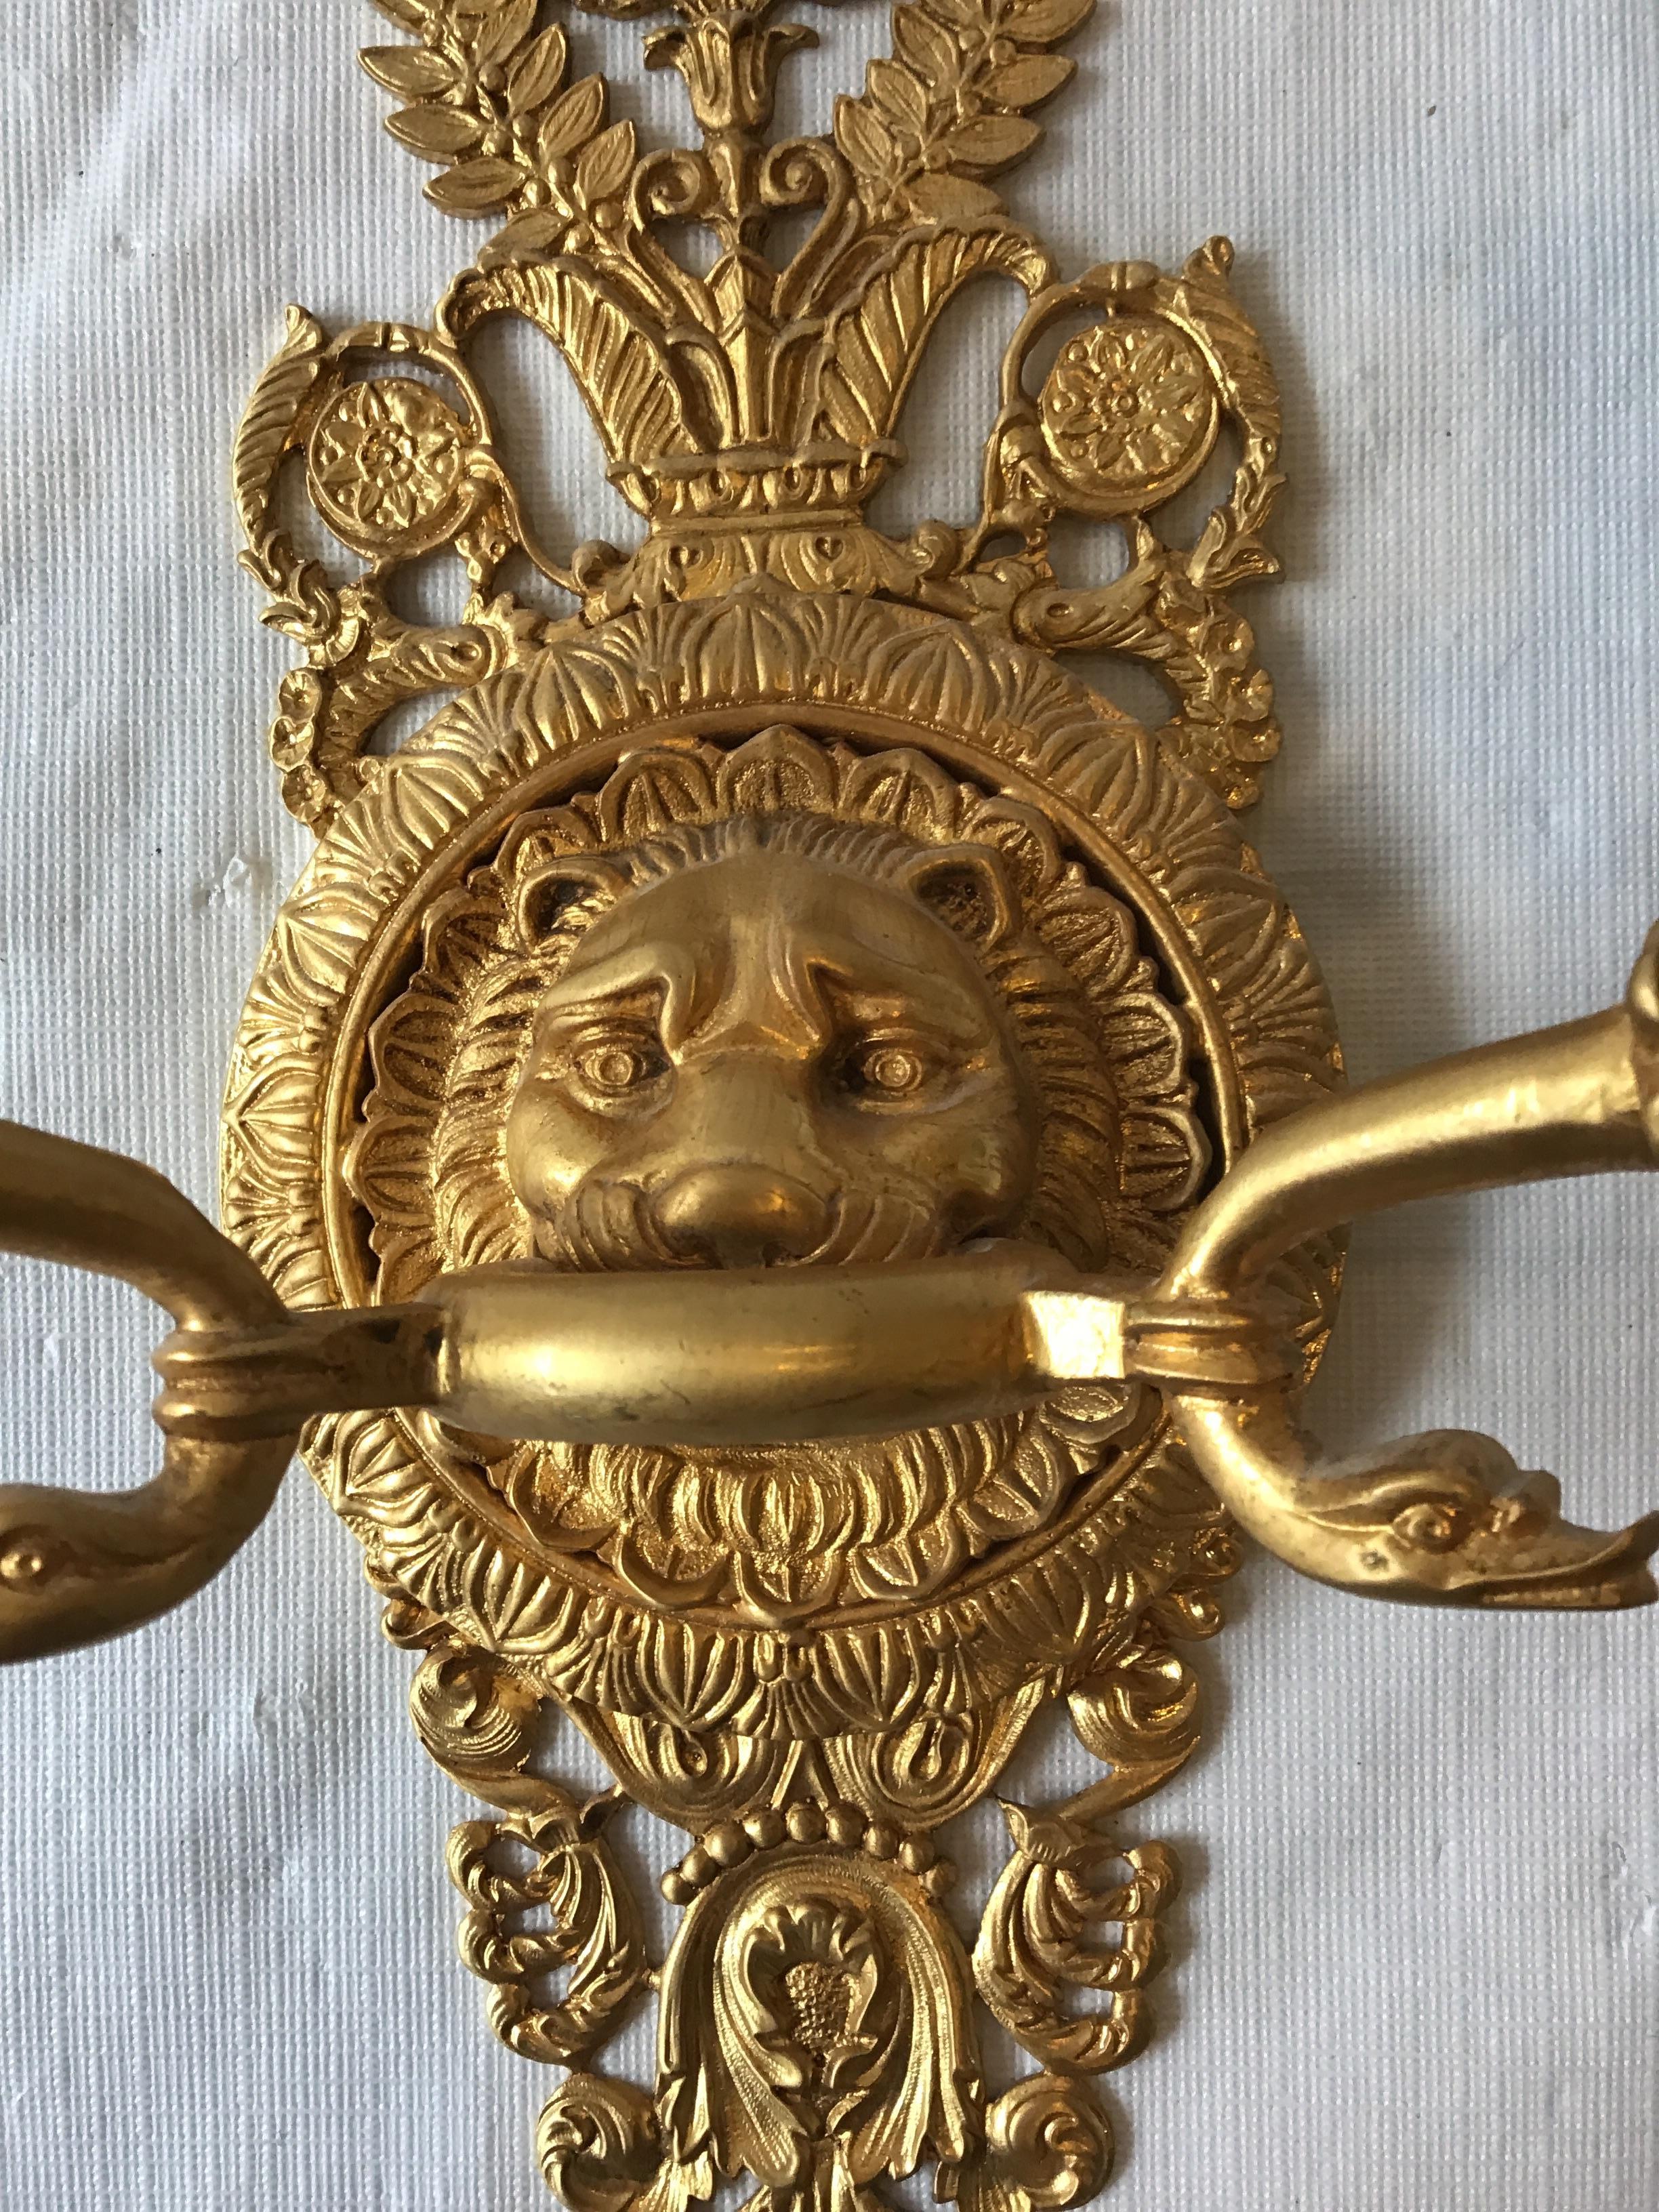 3 Versace Style Gold-Plated Lion Head Classical Sconces For Sale 1